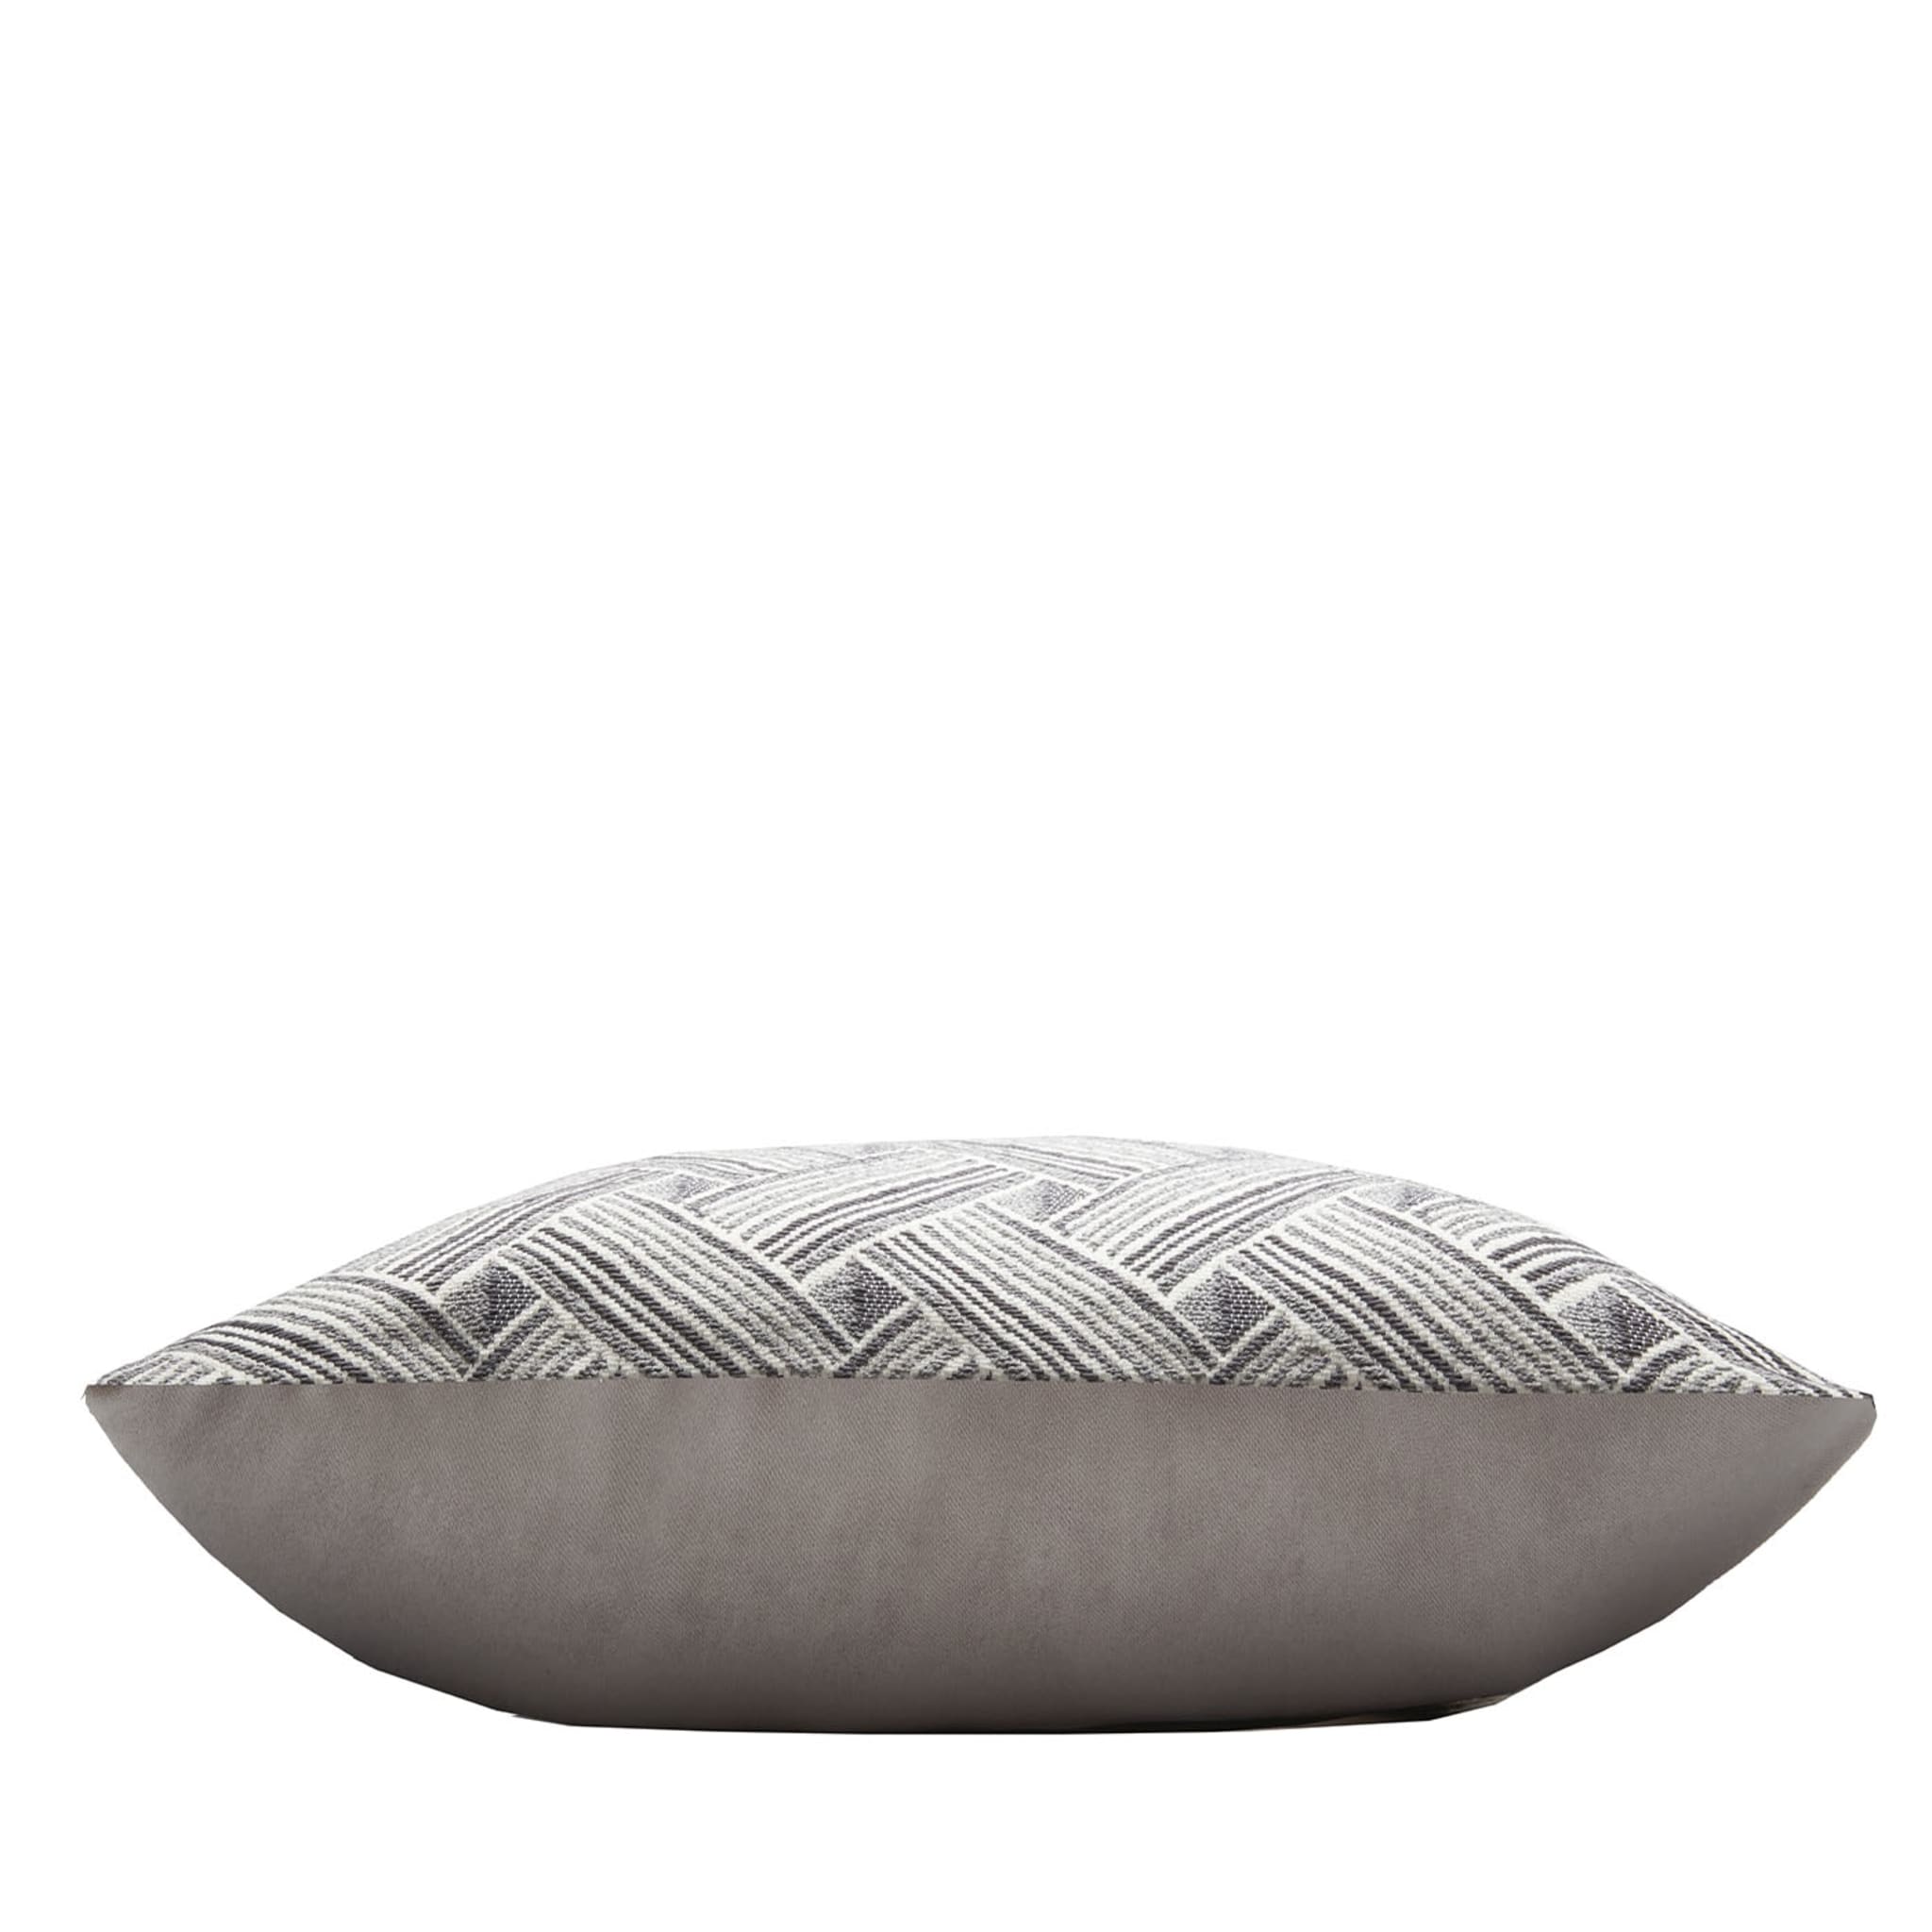 Rock Collection Gray Cushion - Alternative view 1